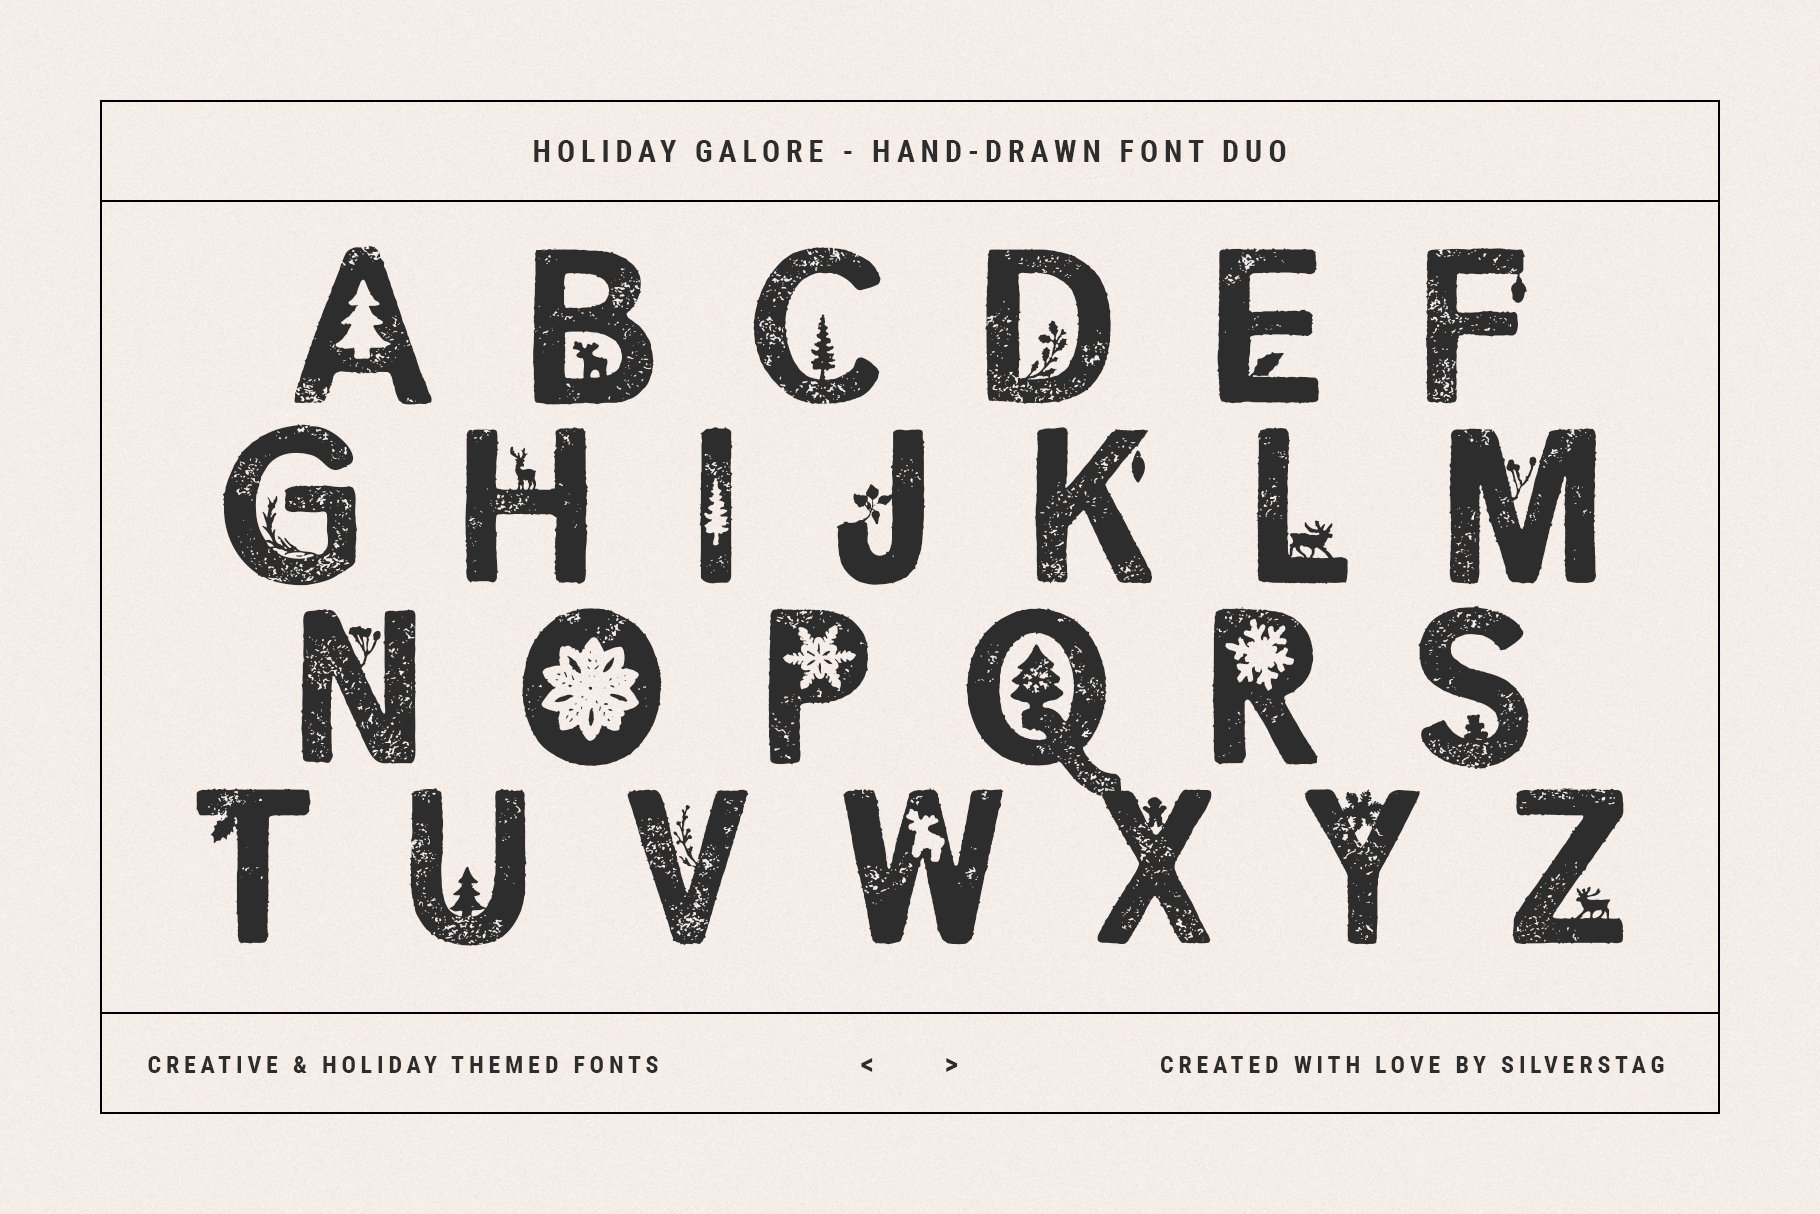 29 holiday galore font duo by silver stag 351